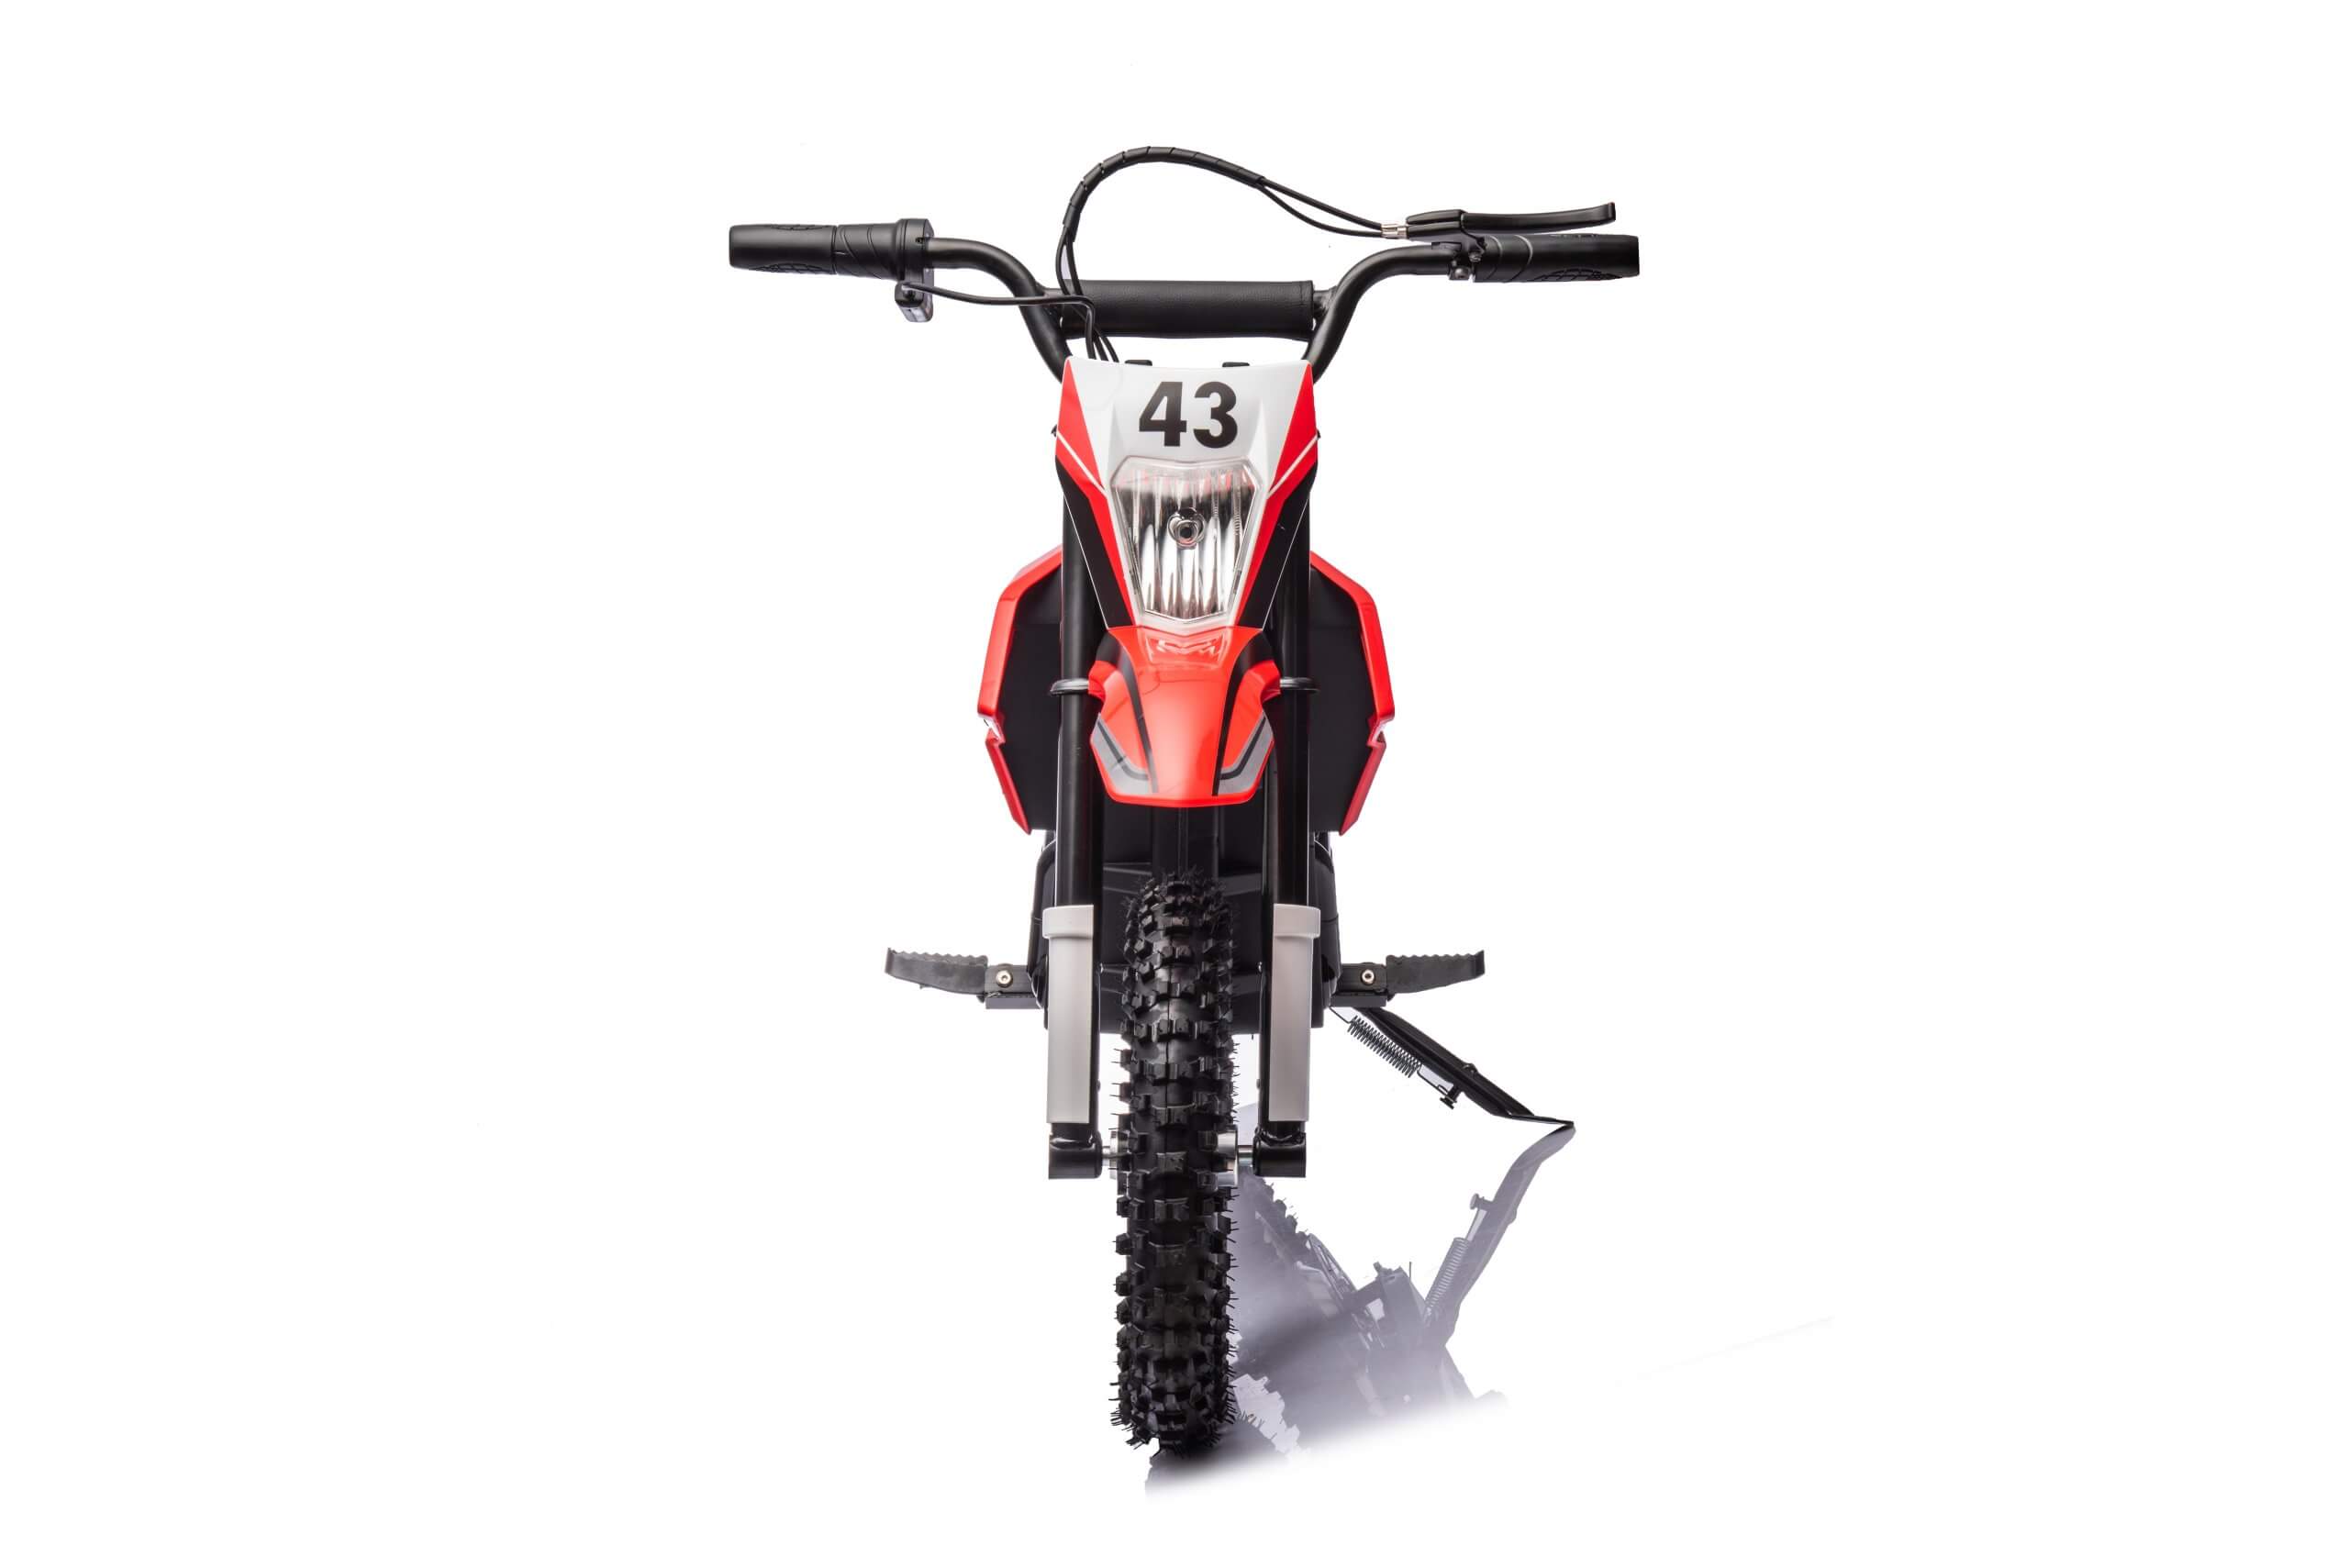 Kidsvip 36V Dirtbike 25Kmh Red2023 10 02 At 11.27.59 Am 2 Scaled 26 Shop By Color